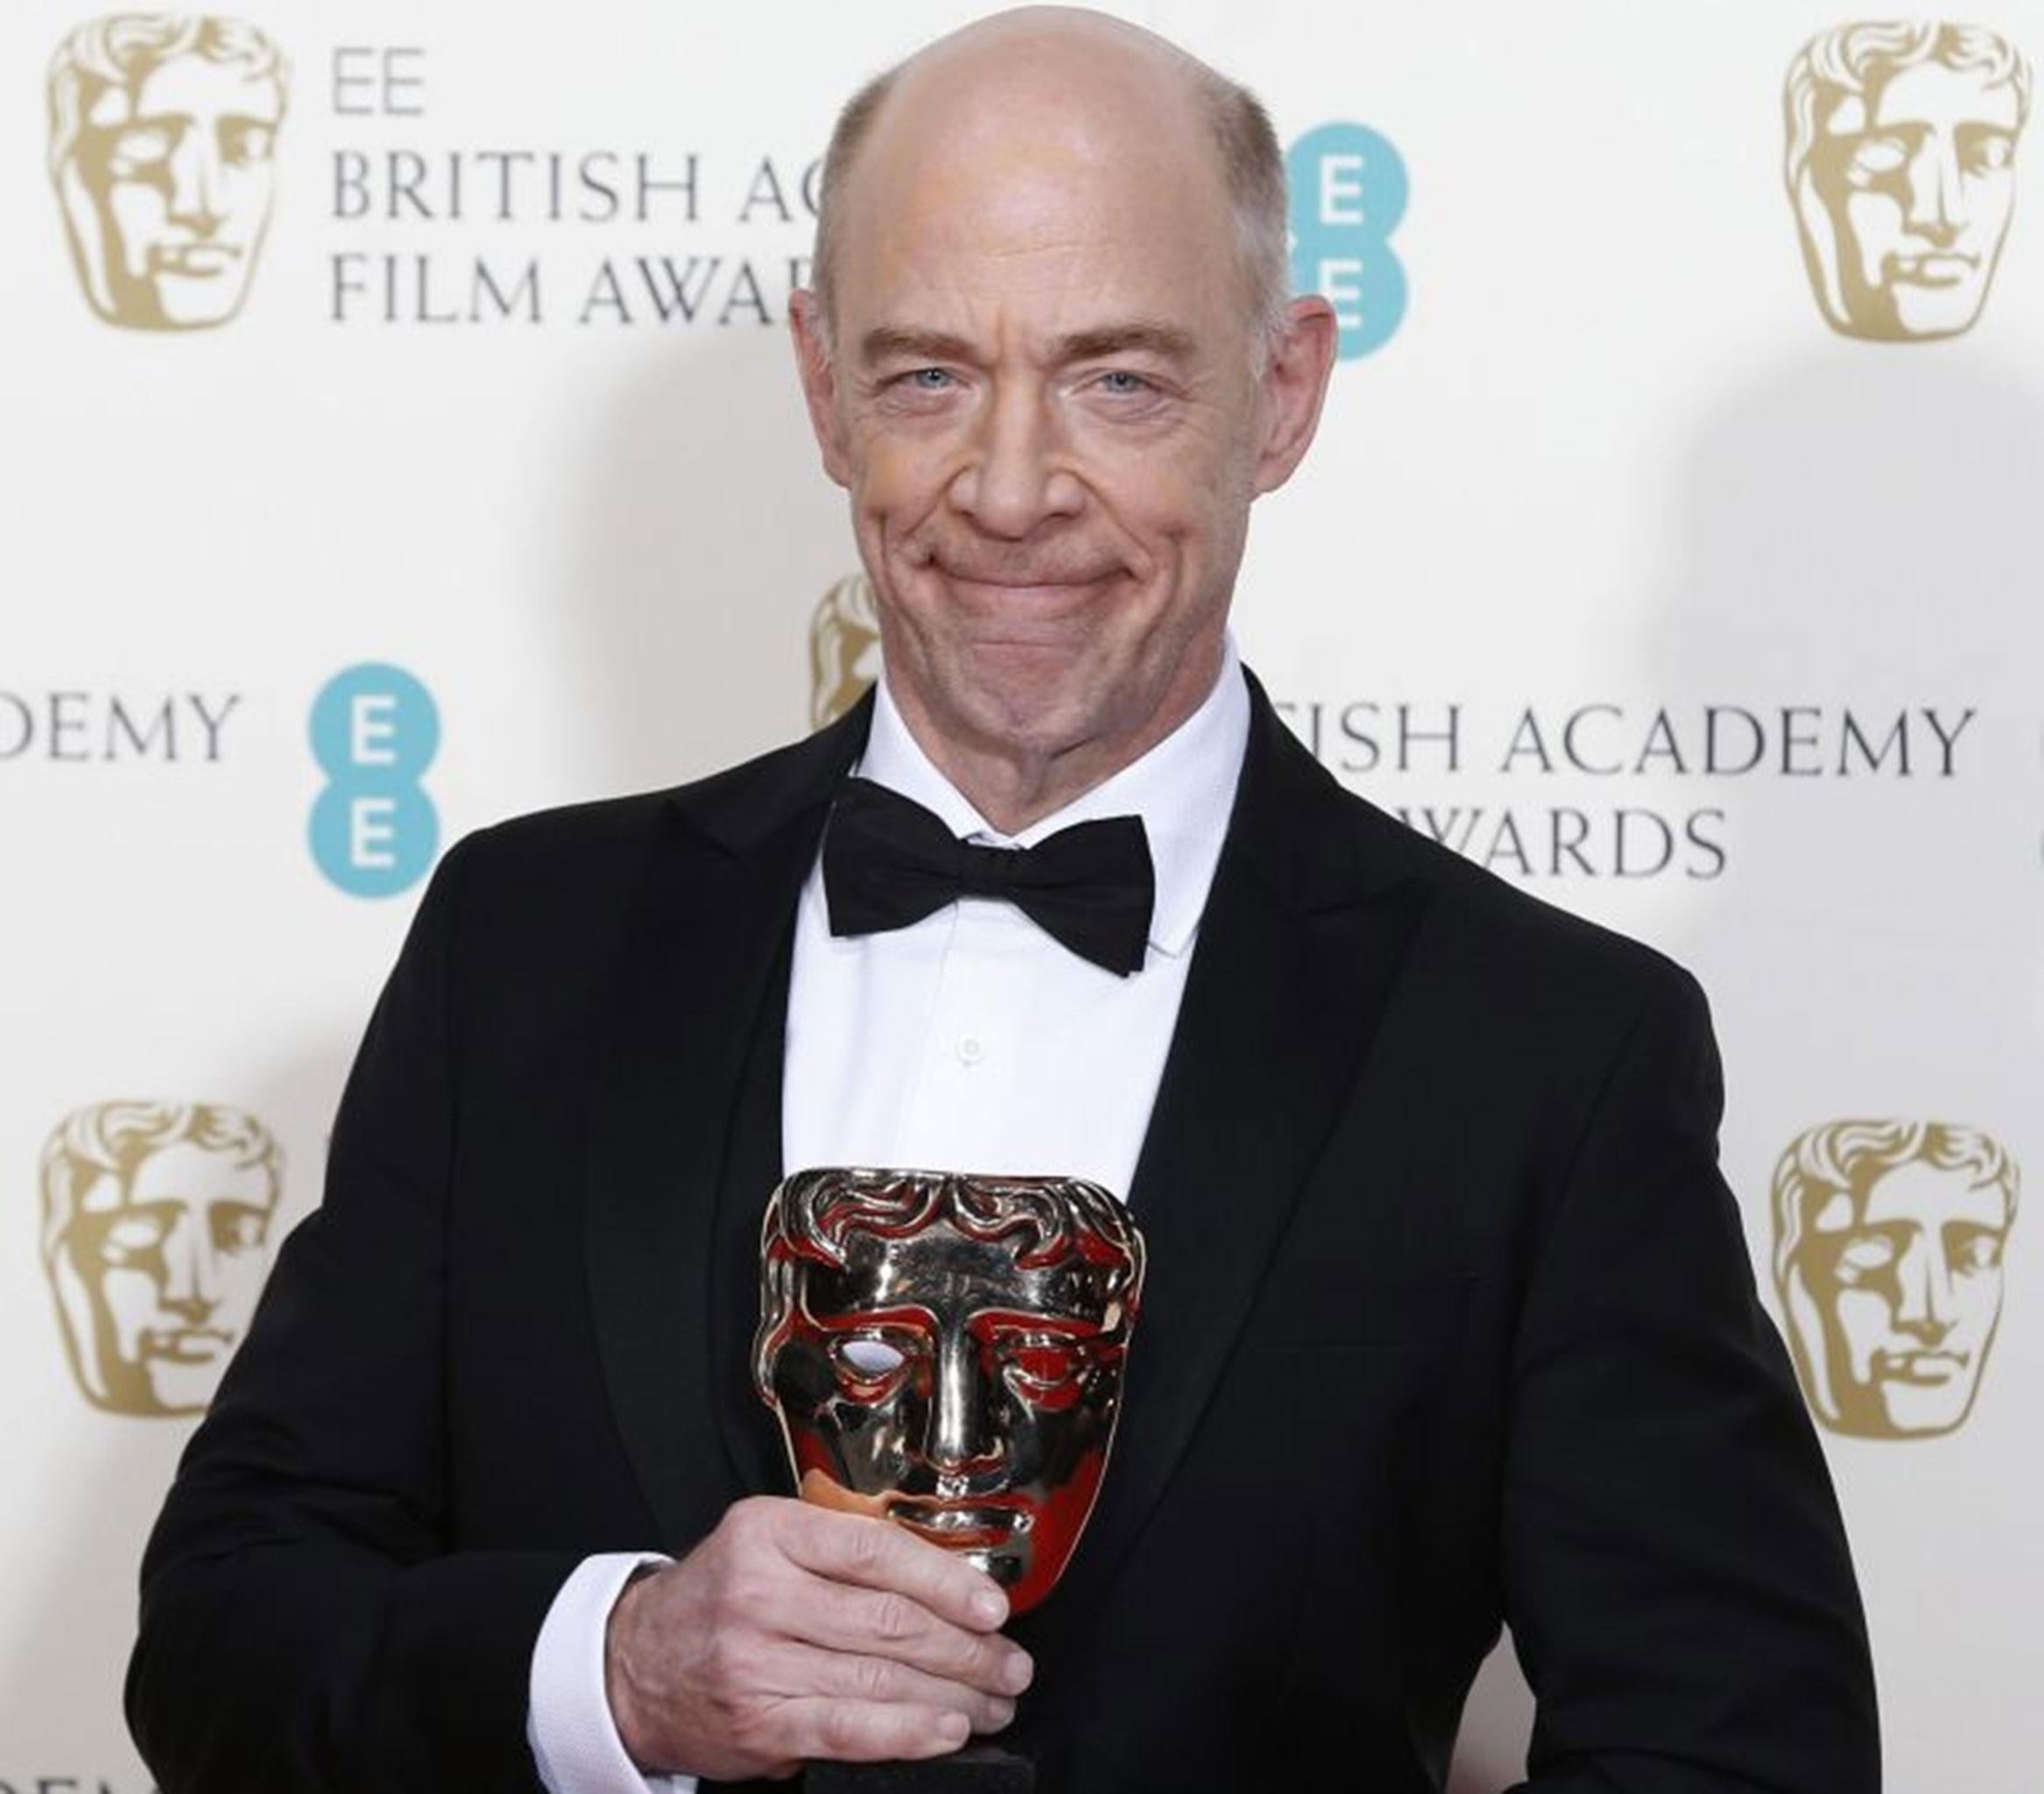 J.K. Simmons celebrates after winning best supporting actor for "Whiplash" at the BAFTA awards ceremony